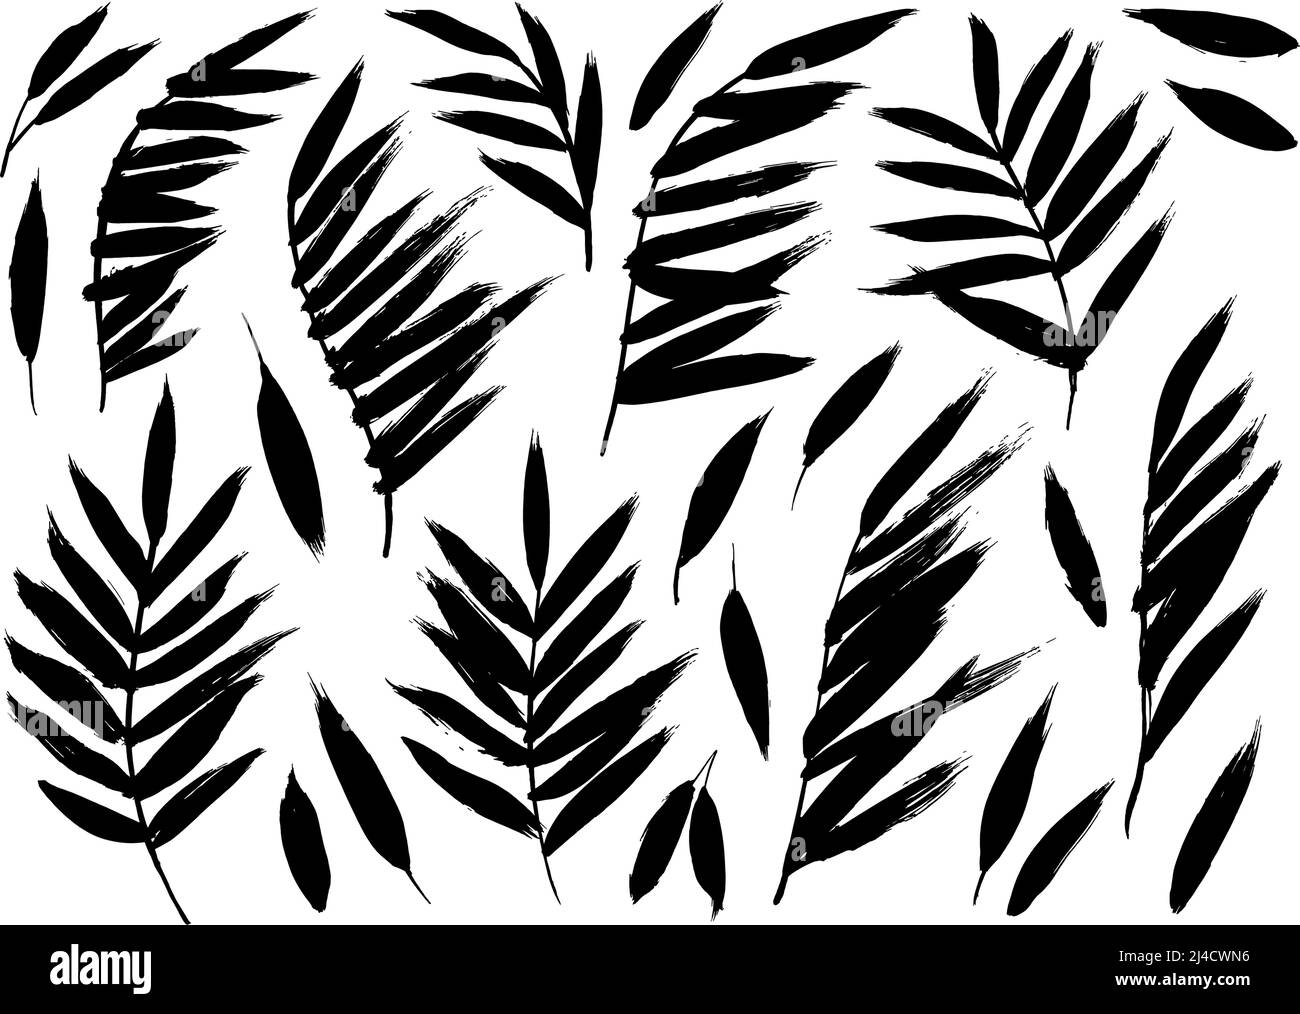 Set of tropical black brush leaves in silhouettes. Stock Vector